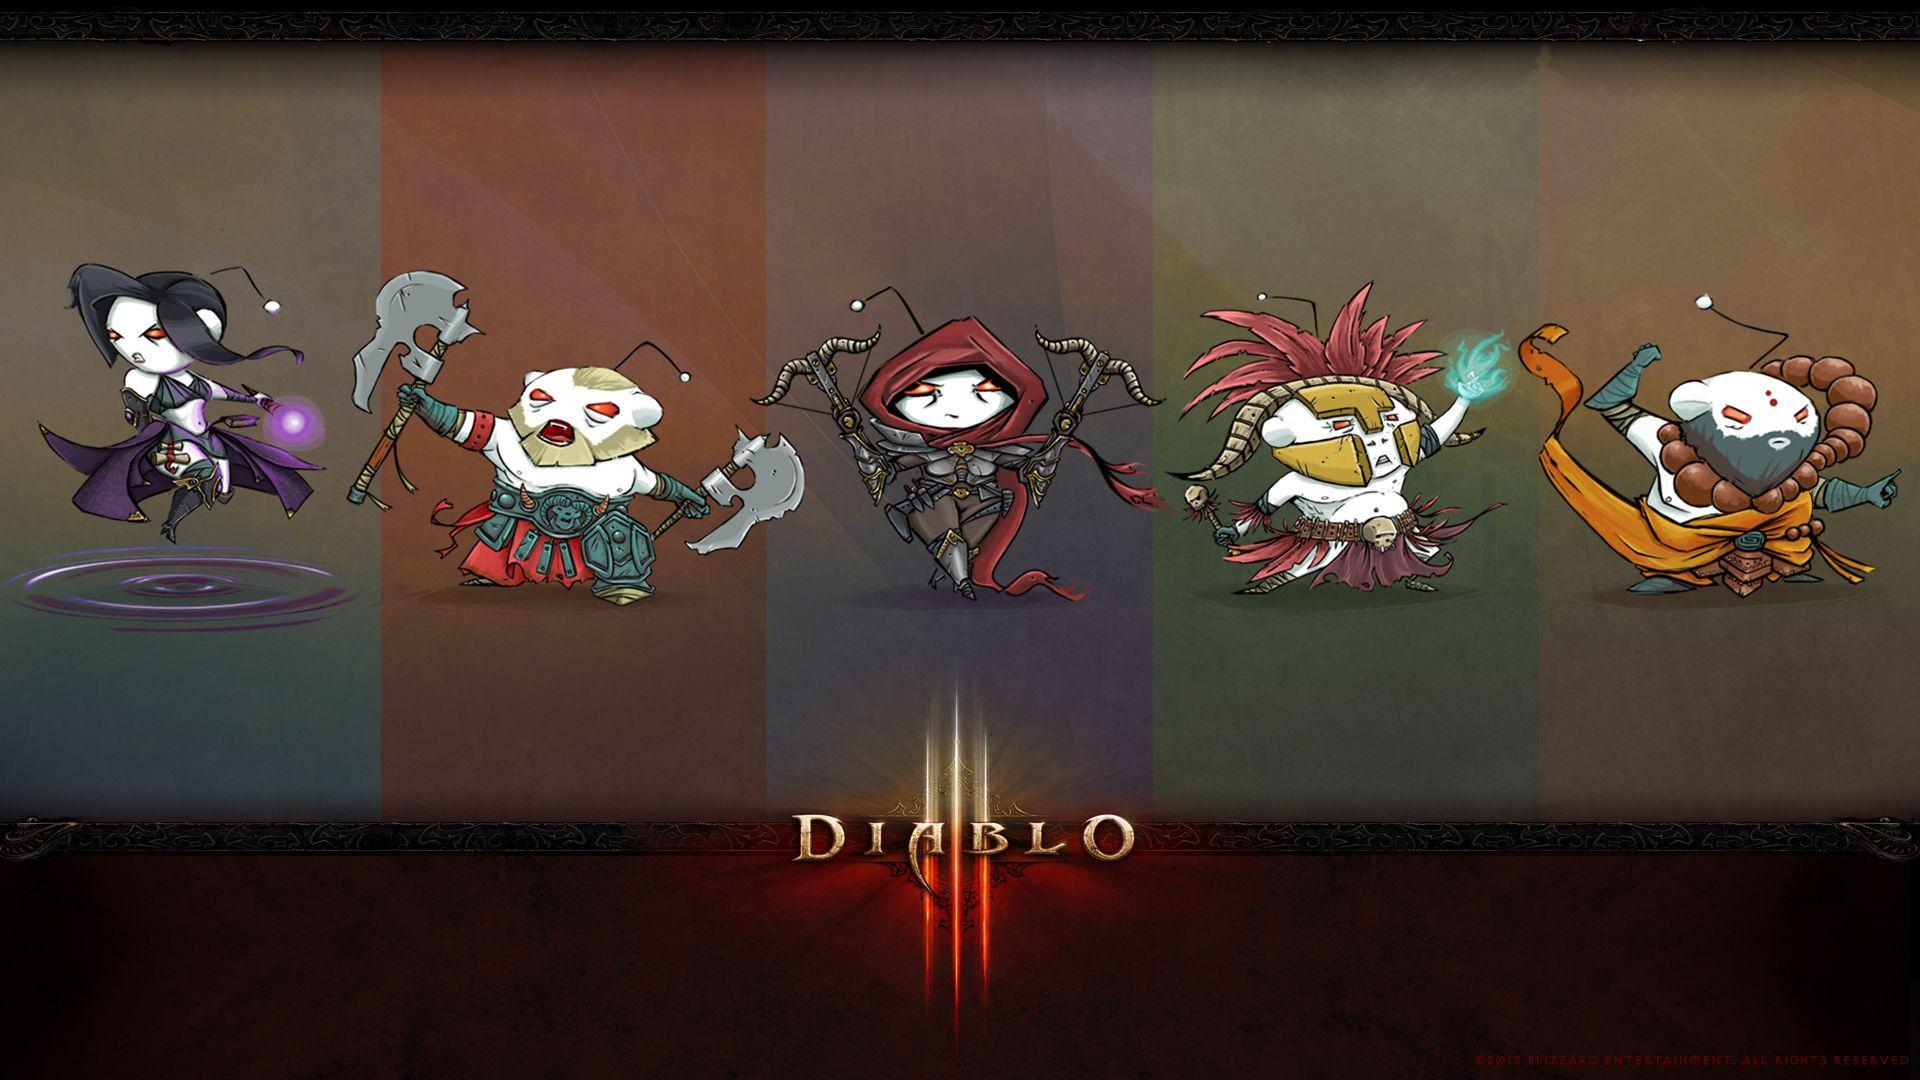 Diablo 3 Gallery of Wallpaper. Free Download For Android